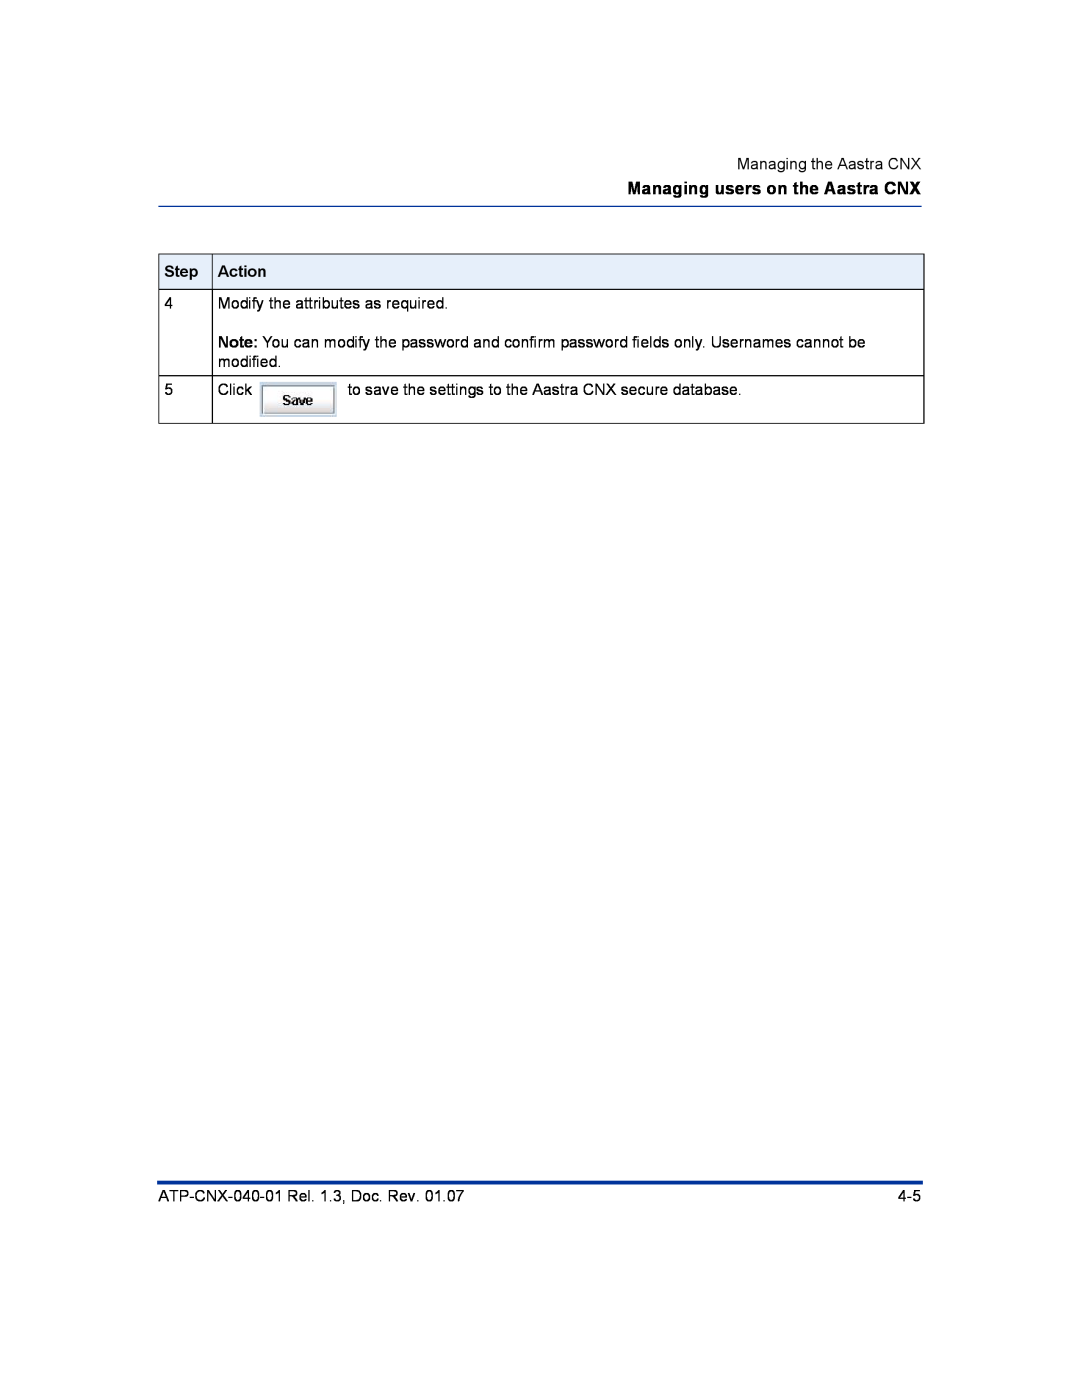 Aastra Telecom ATP-CNX-040-01 manual Managing users on the Aastra CNX, Step, Action 